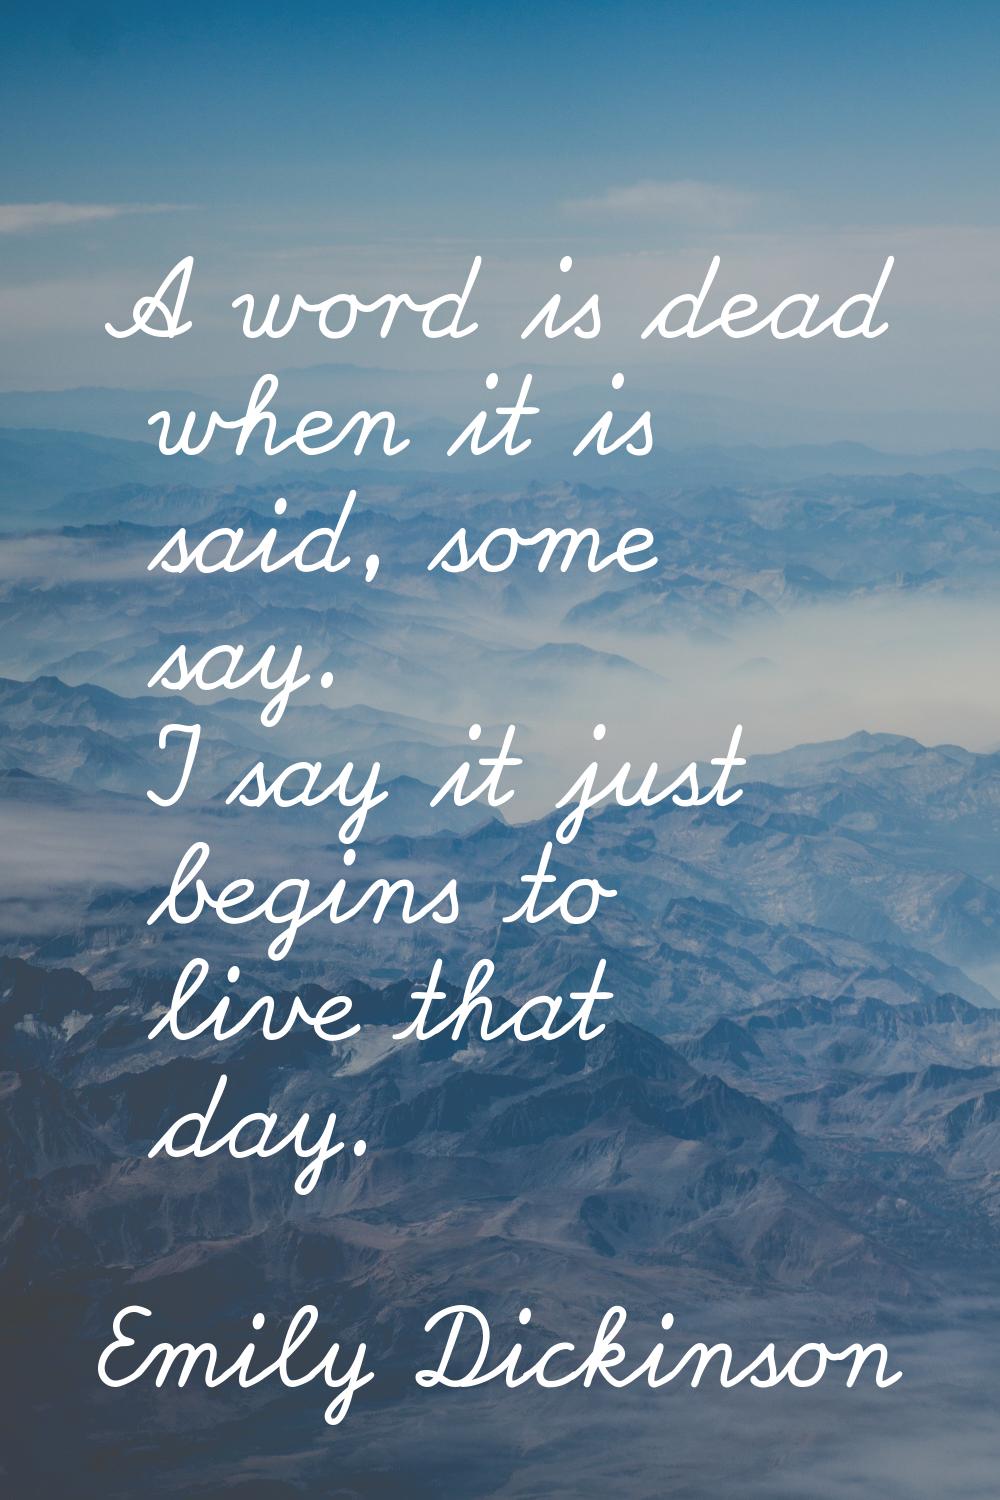 A word is dead when it is said, some say. I say it just begins to live that day.